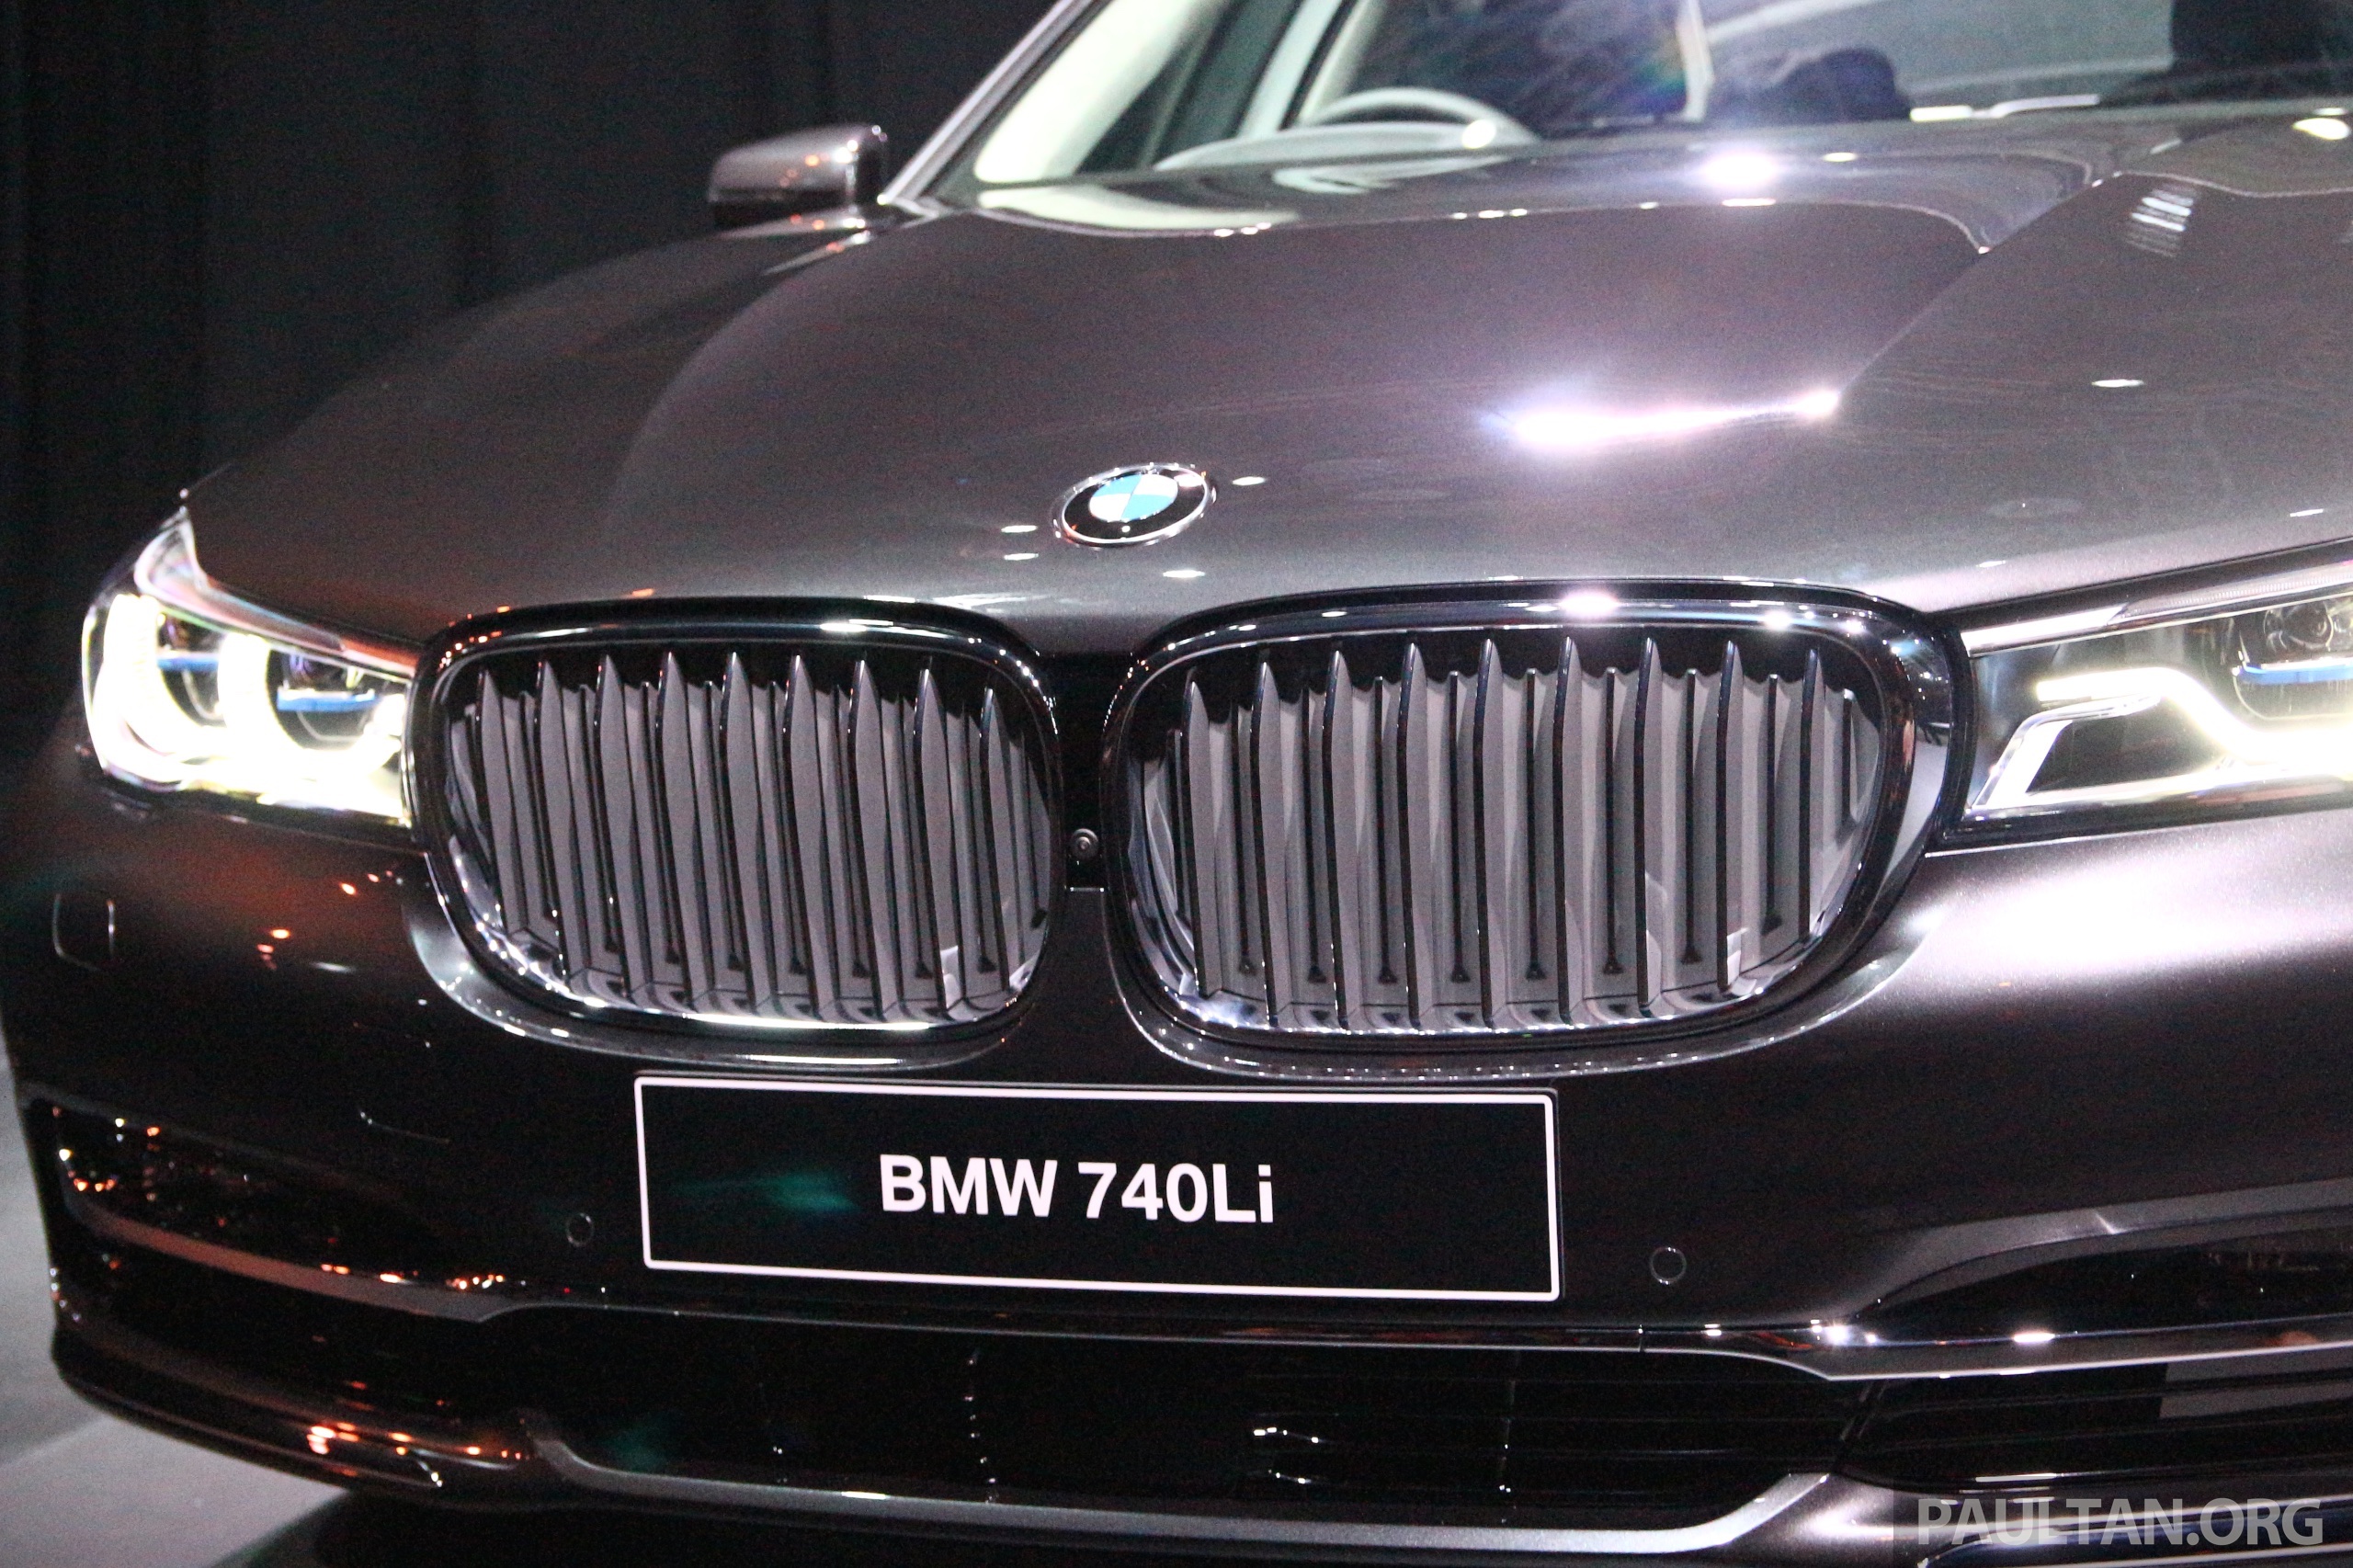 New G11 BMW 7 Series launched in Malaysia - 2.0 turbo 4cyl 730Li and ...